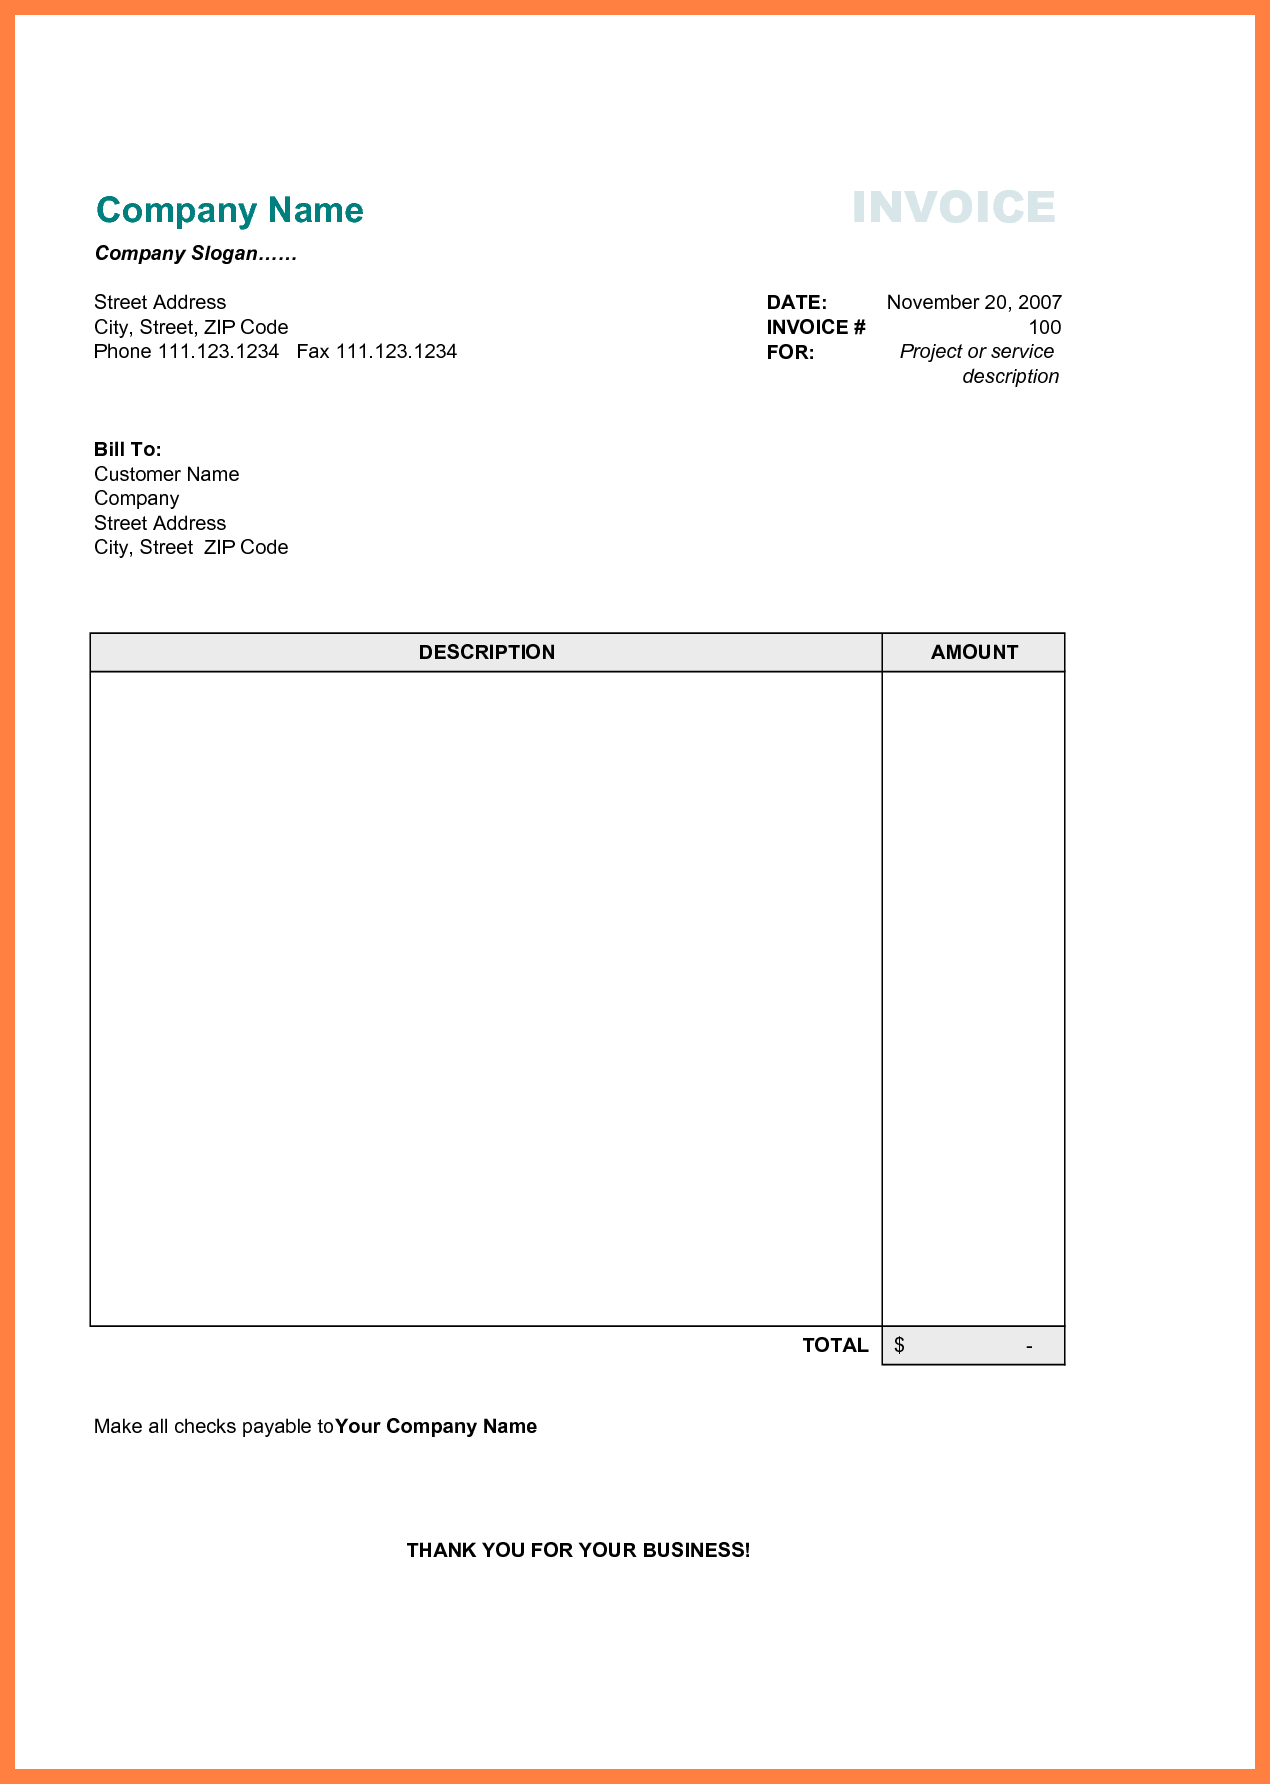 Free Printable Business Invoice Template - Invoice Format In Excel - Free Printable Business Templates